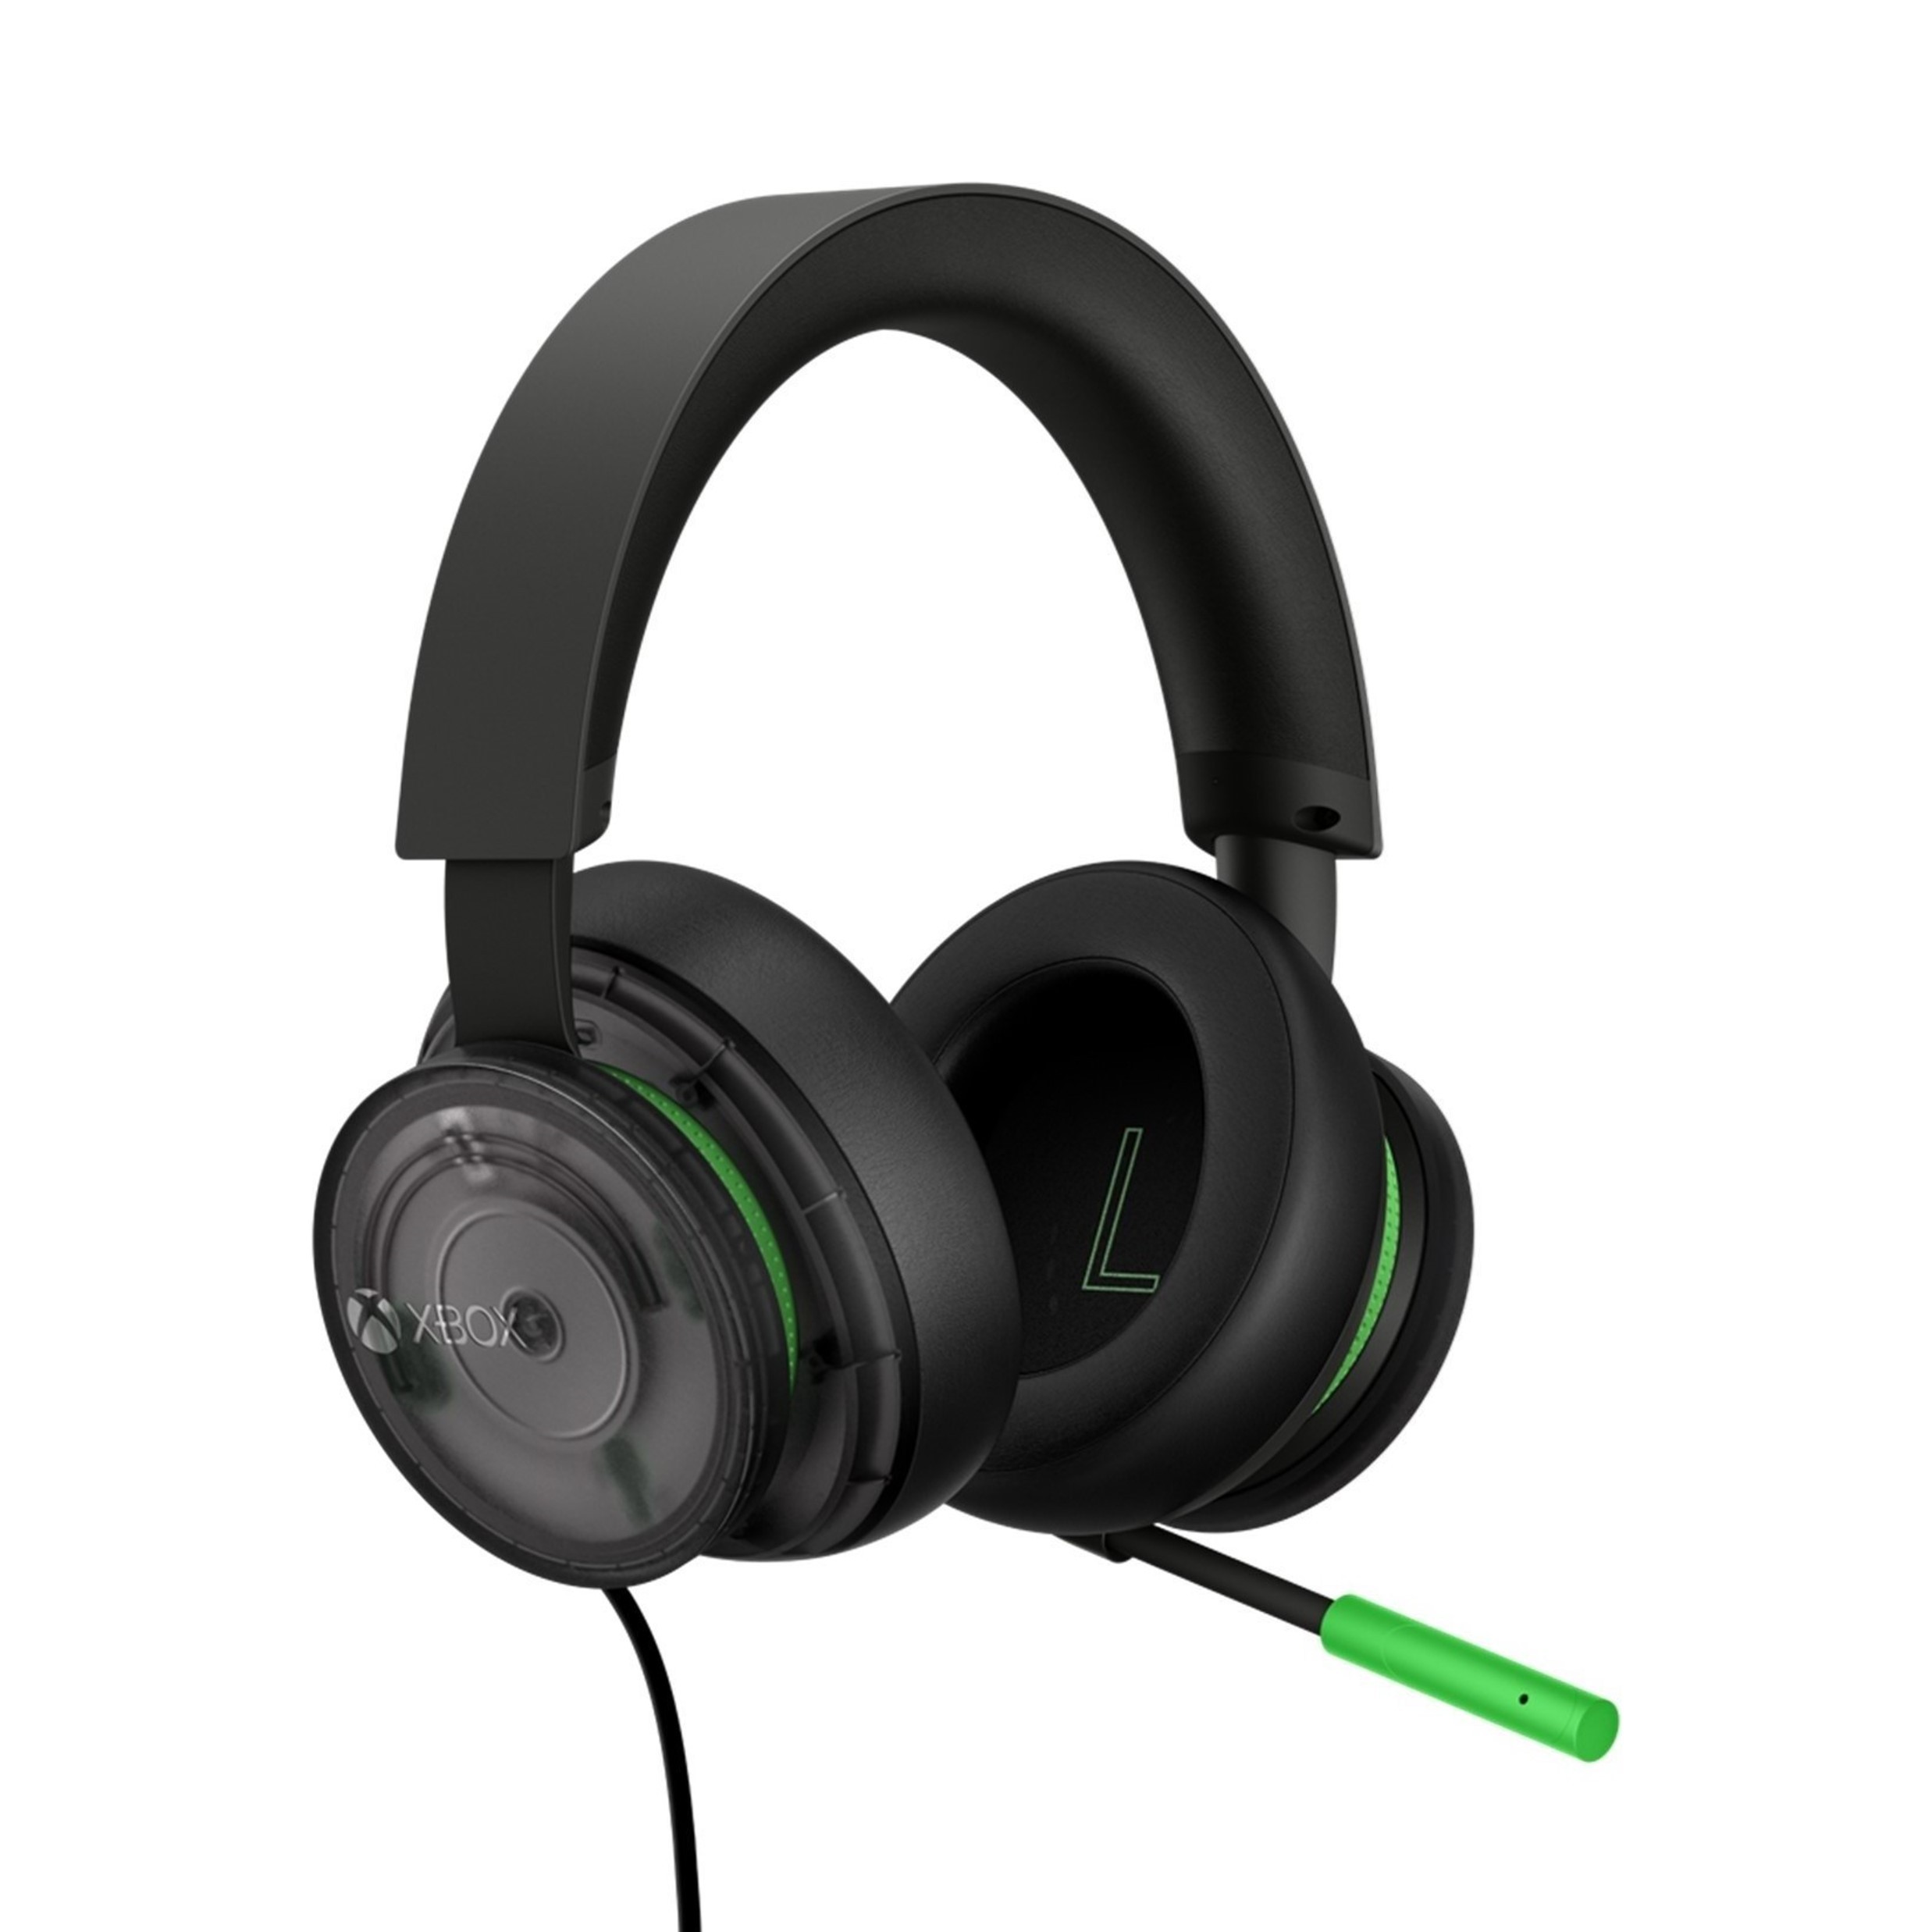 Microsoft Xbox 20th Anniversary Special Edition Stereo Headset - Xbox Series X Hardware